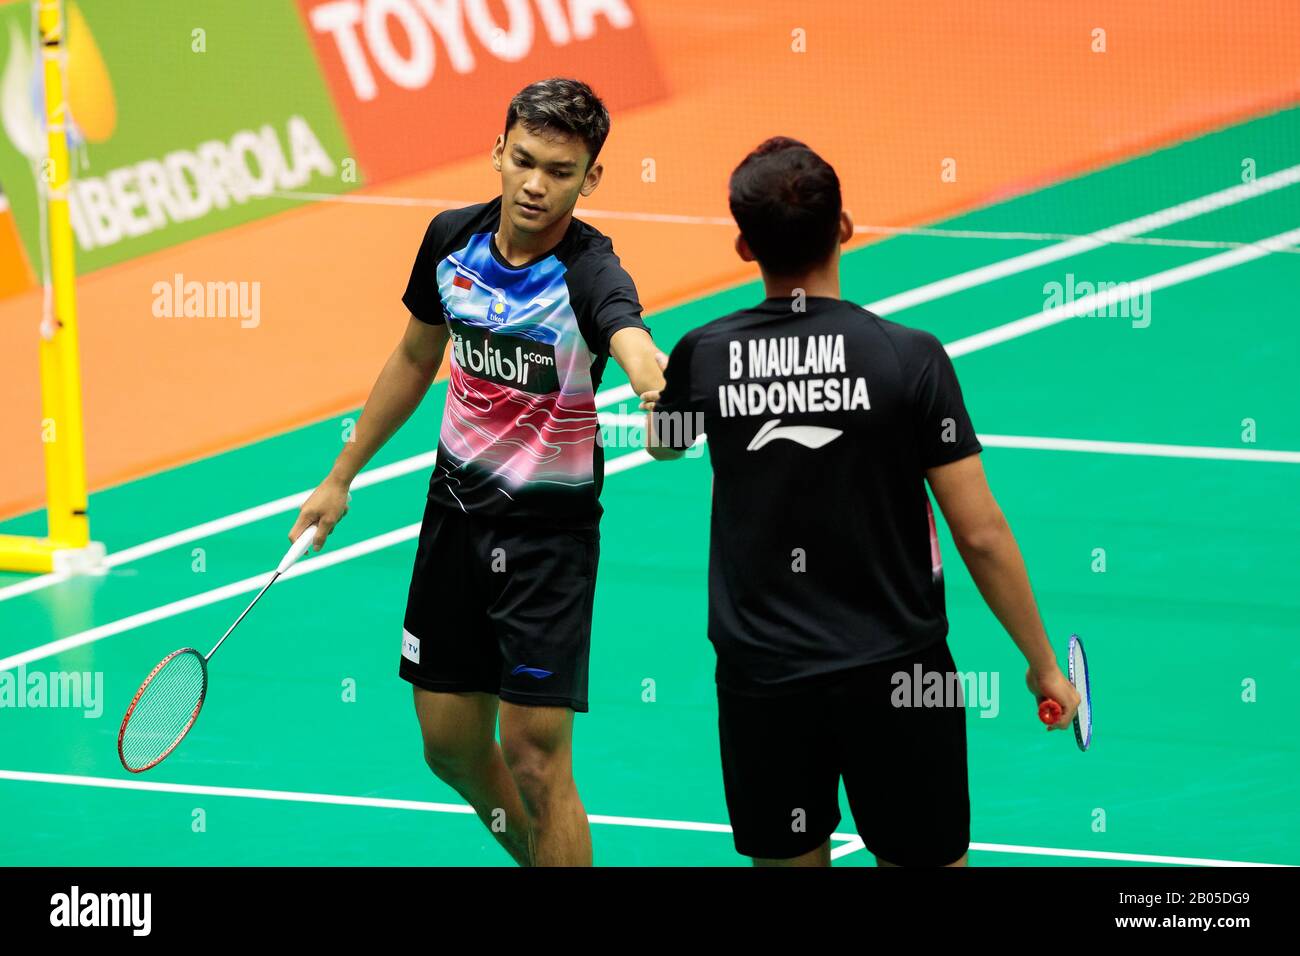 Muhammad Shohibul Fikri and Bagas Maulana of Indonesia competes in the  Men's team double qualification Round 1 match against Ronan Labar and Brice  Leverdez of France on day one of the Barcelona